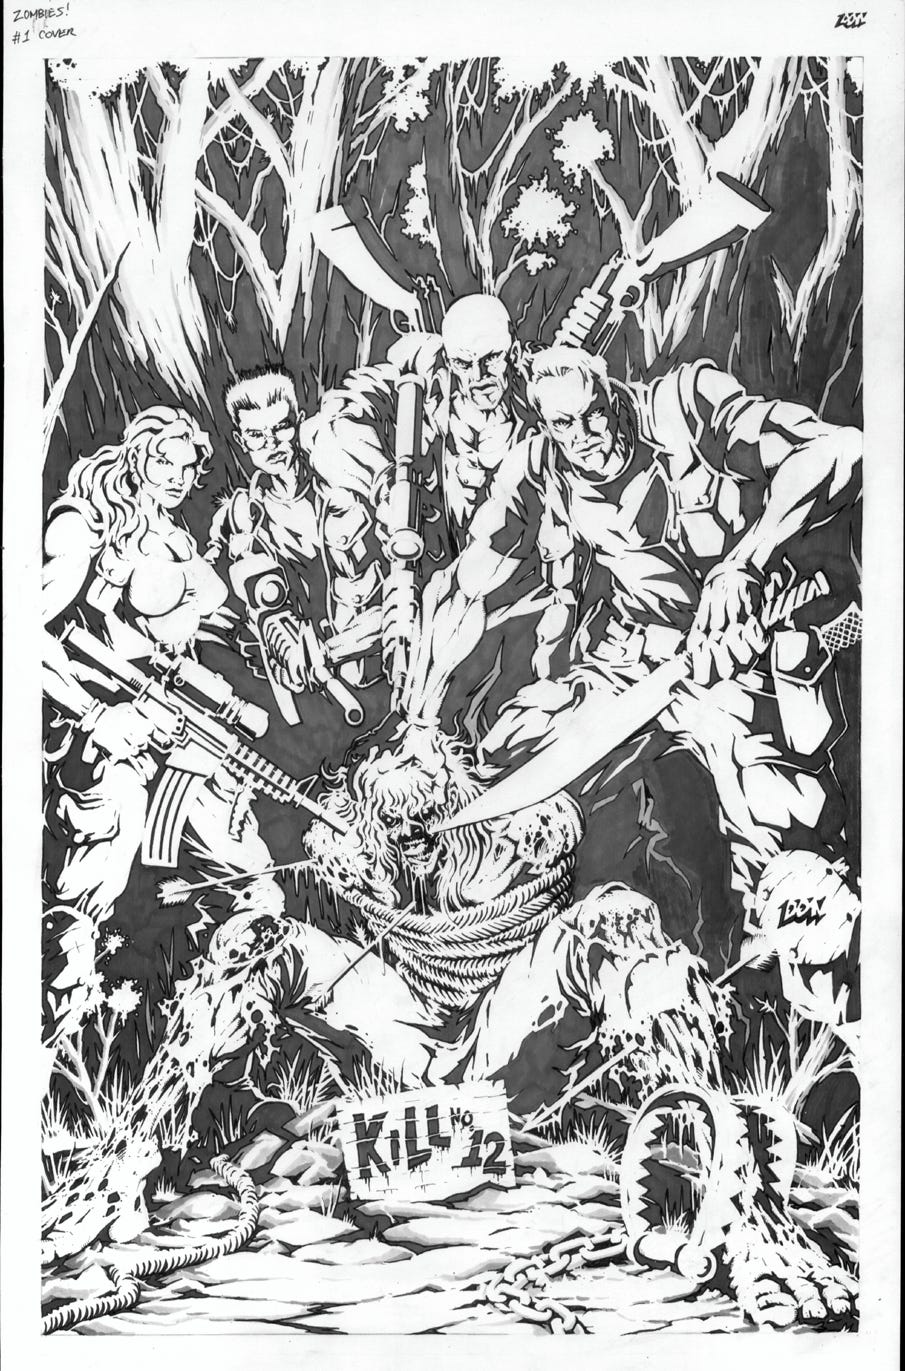 IDW Zombies Hunters issue #1 cover art Don Figureoa